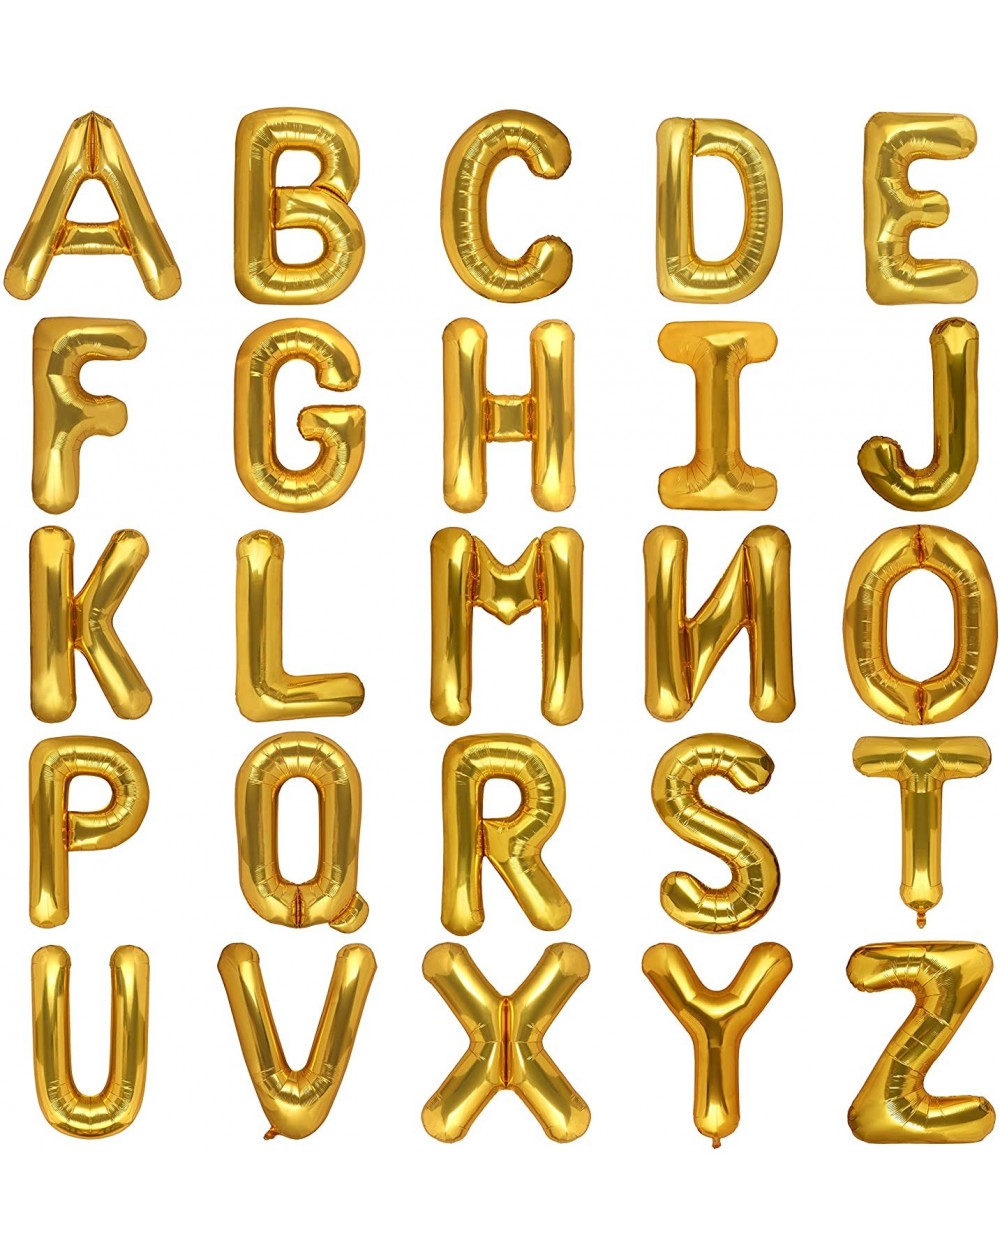 Balloons 40 Inch Giant Gold Letter Q Balloon Birthday Party Decorations Mylar Foil Big Alphabet Large Helium Balloon - Letter...